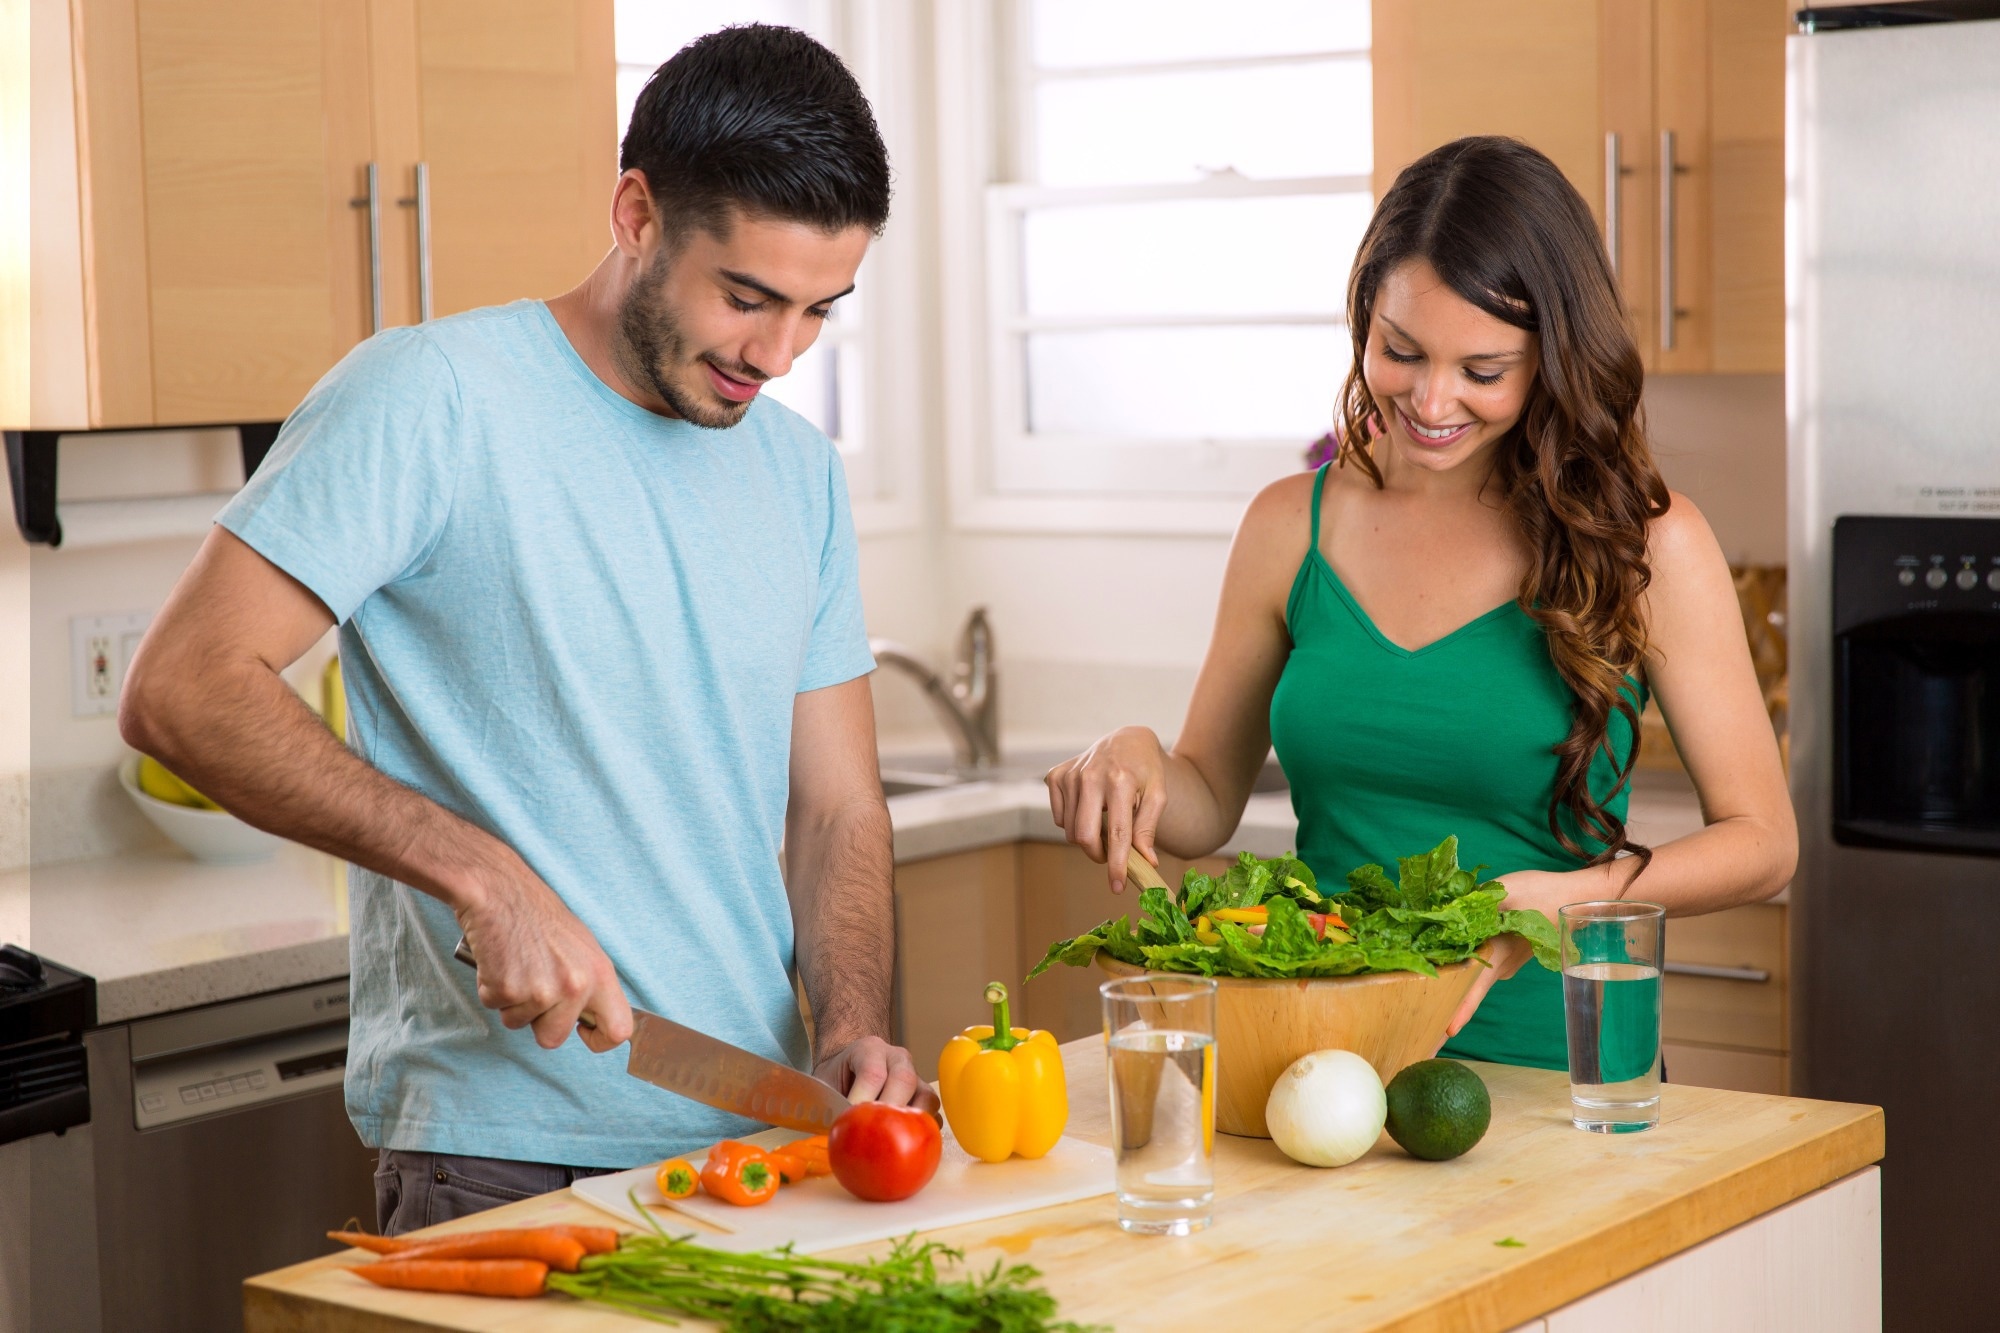 Study: Healthful Eating Behaviors among Couples Contribute to Lower Gestational Weight Gain. Image Credit: El Nariz / Shutterstock